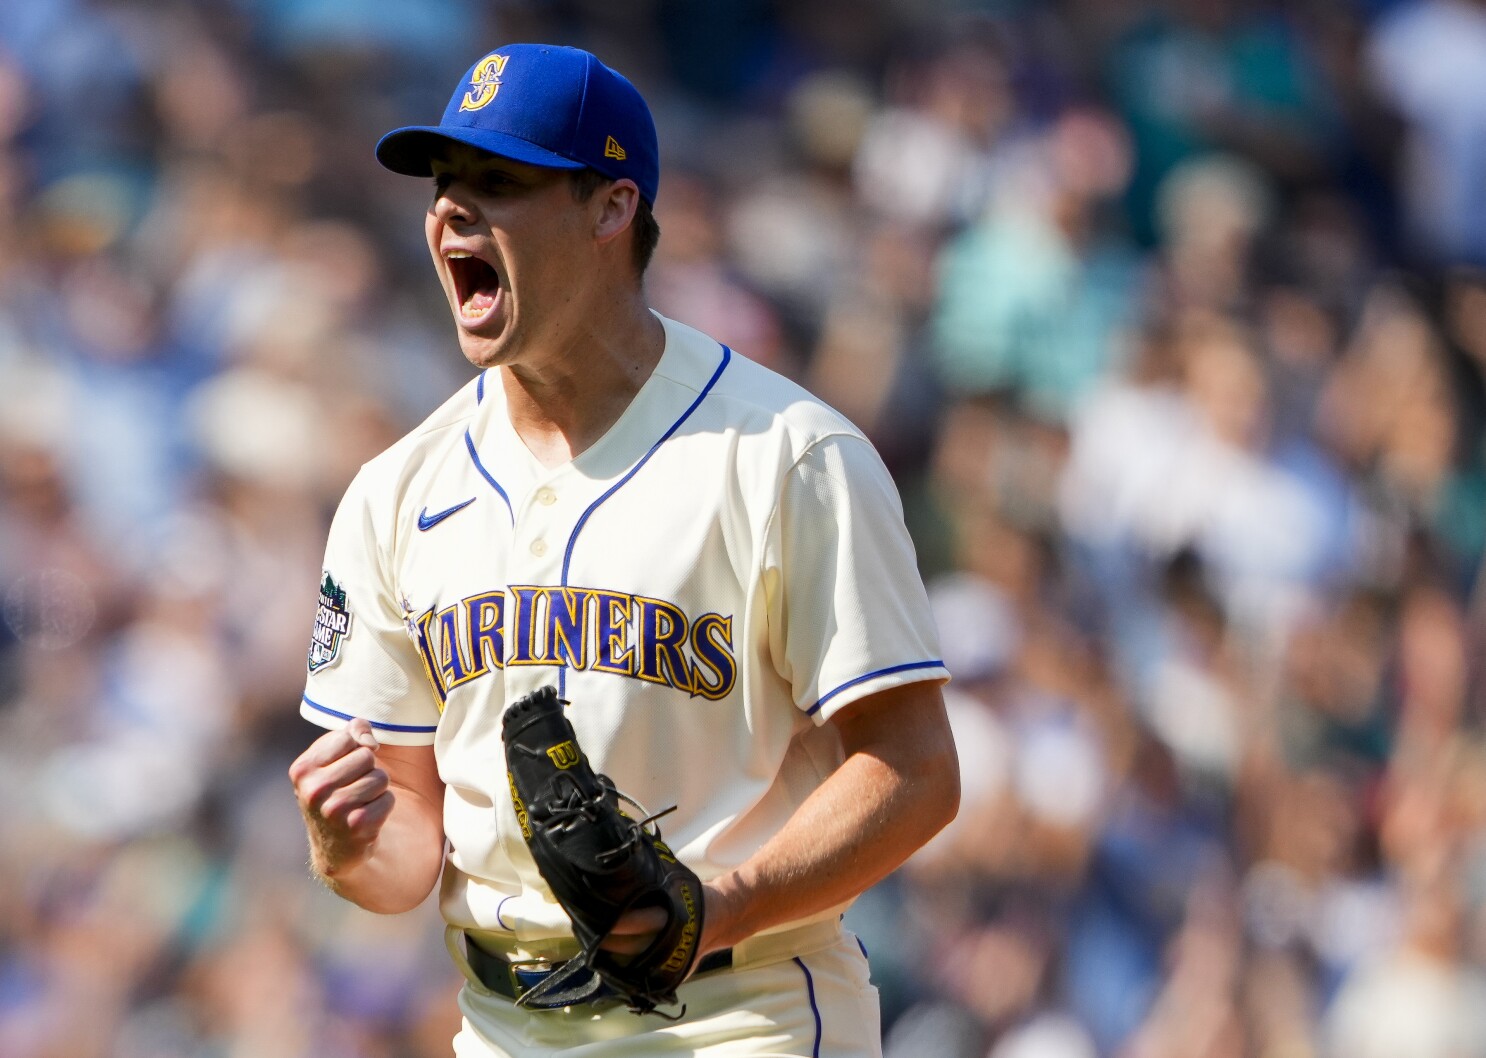 Tyler Anderson's strong start leads Mariners over A's